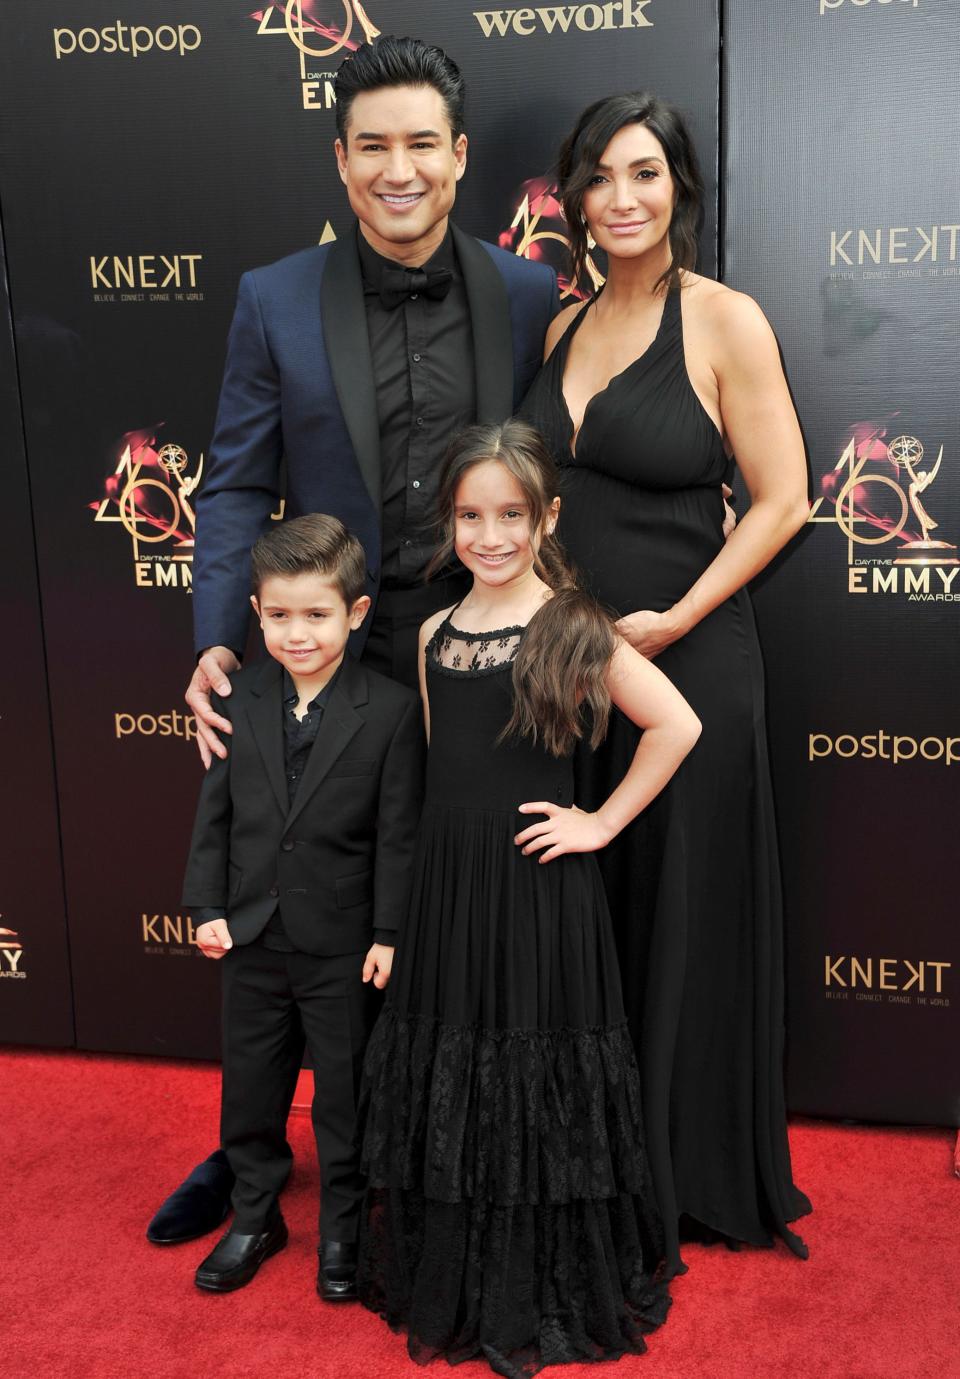 Mario Lopez,with his wife, Courtney Laine Mazza, and two of their children, Dominic and Gia, arrive at the Daytime Emmy Awards on May 5, 2019, in Pasadena, Calif.